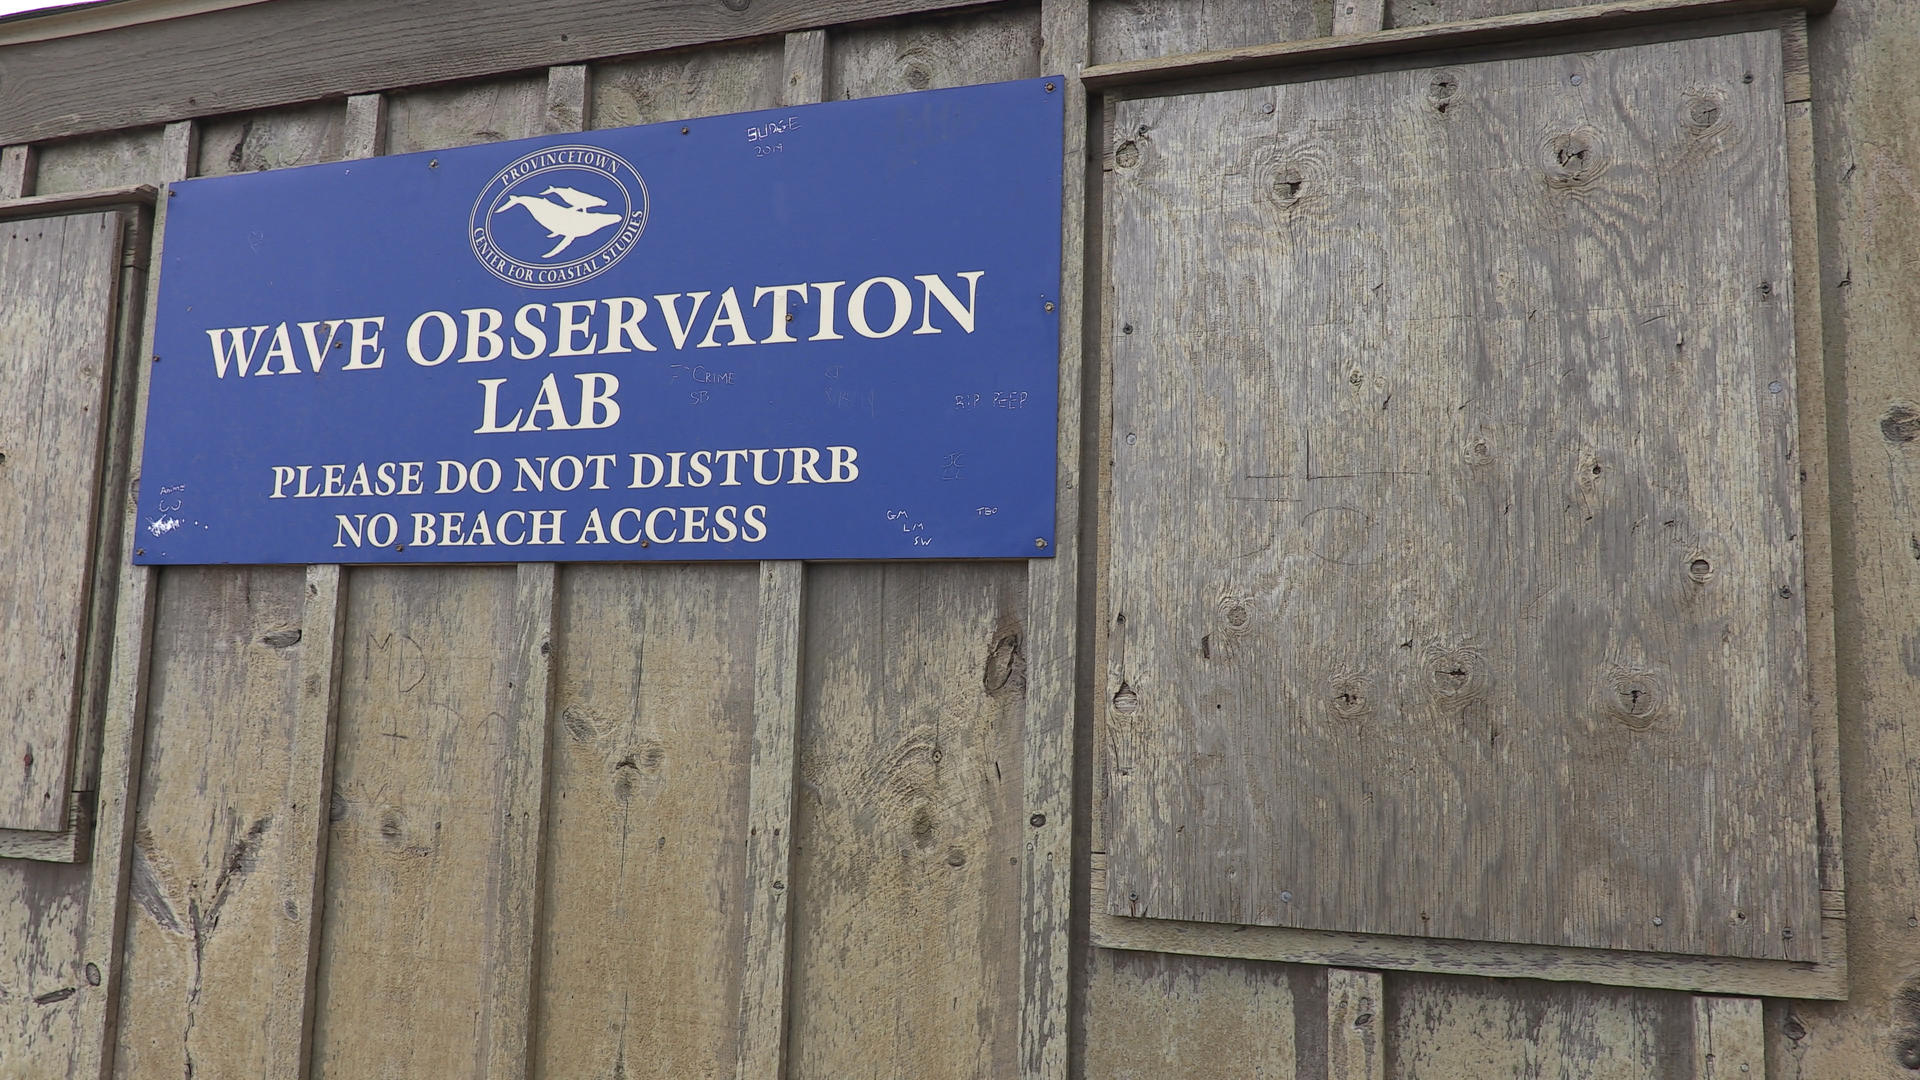 A sign on a wooden shed that states WAVE OBSERVATION LAB.